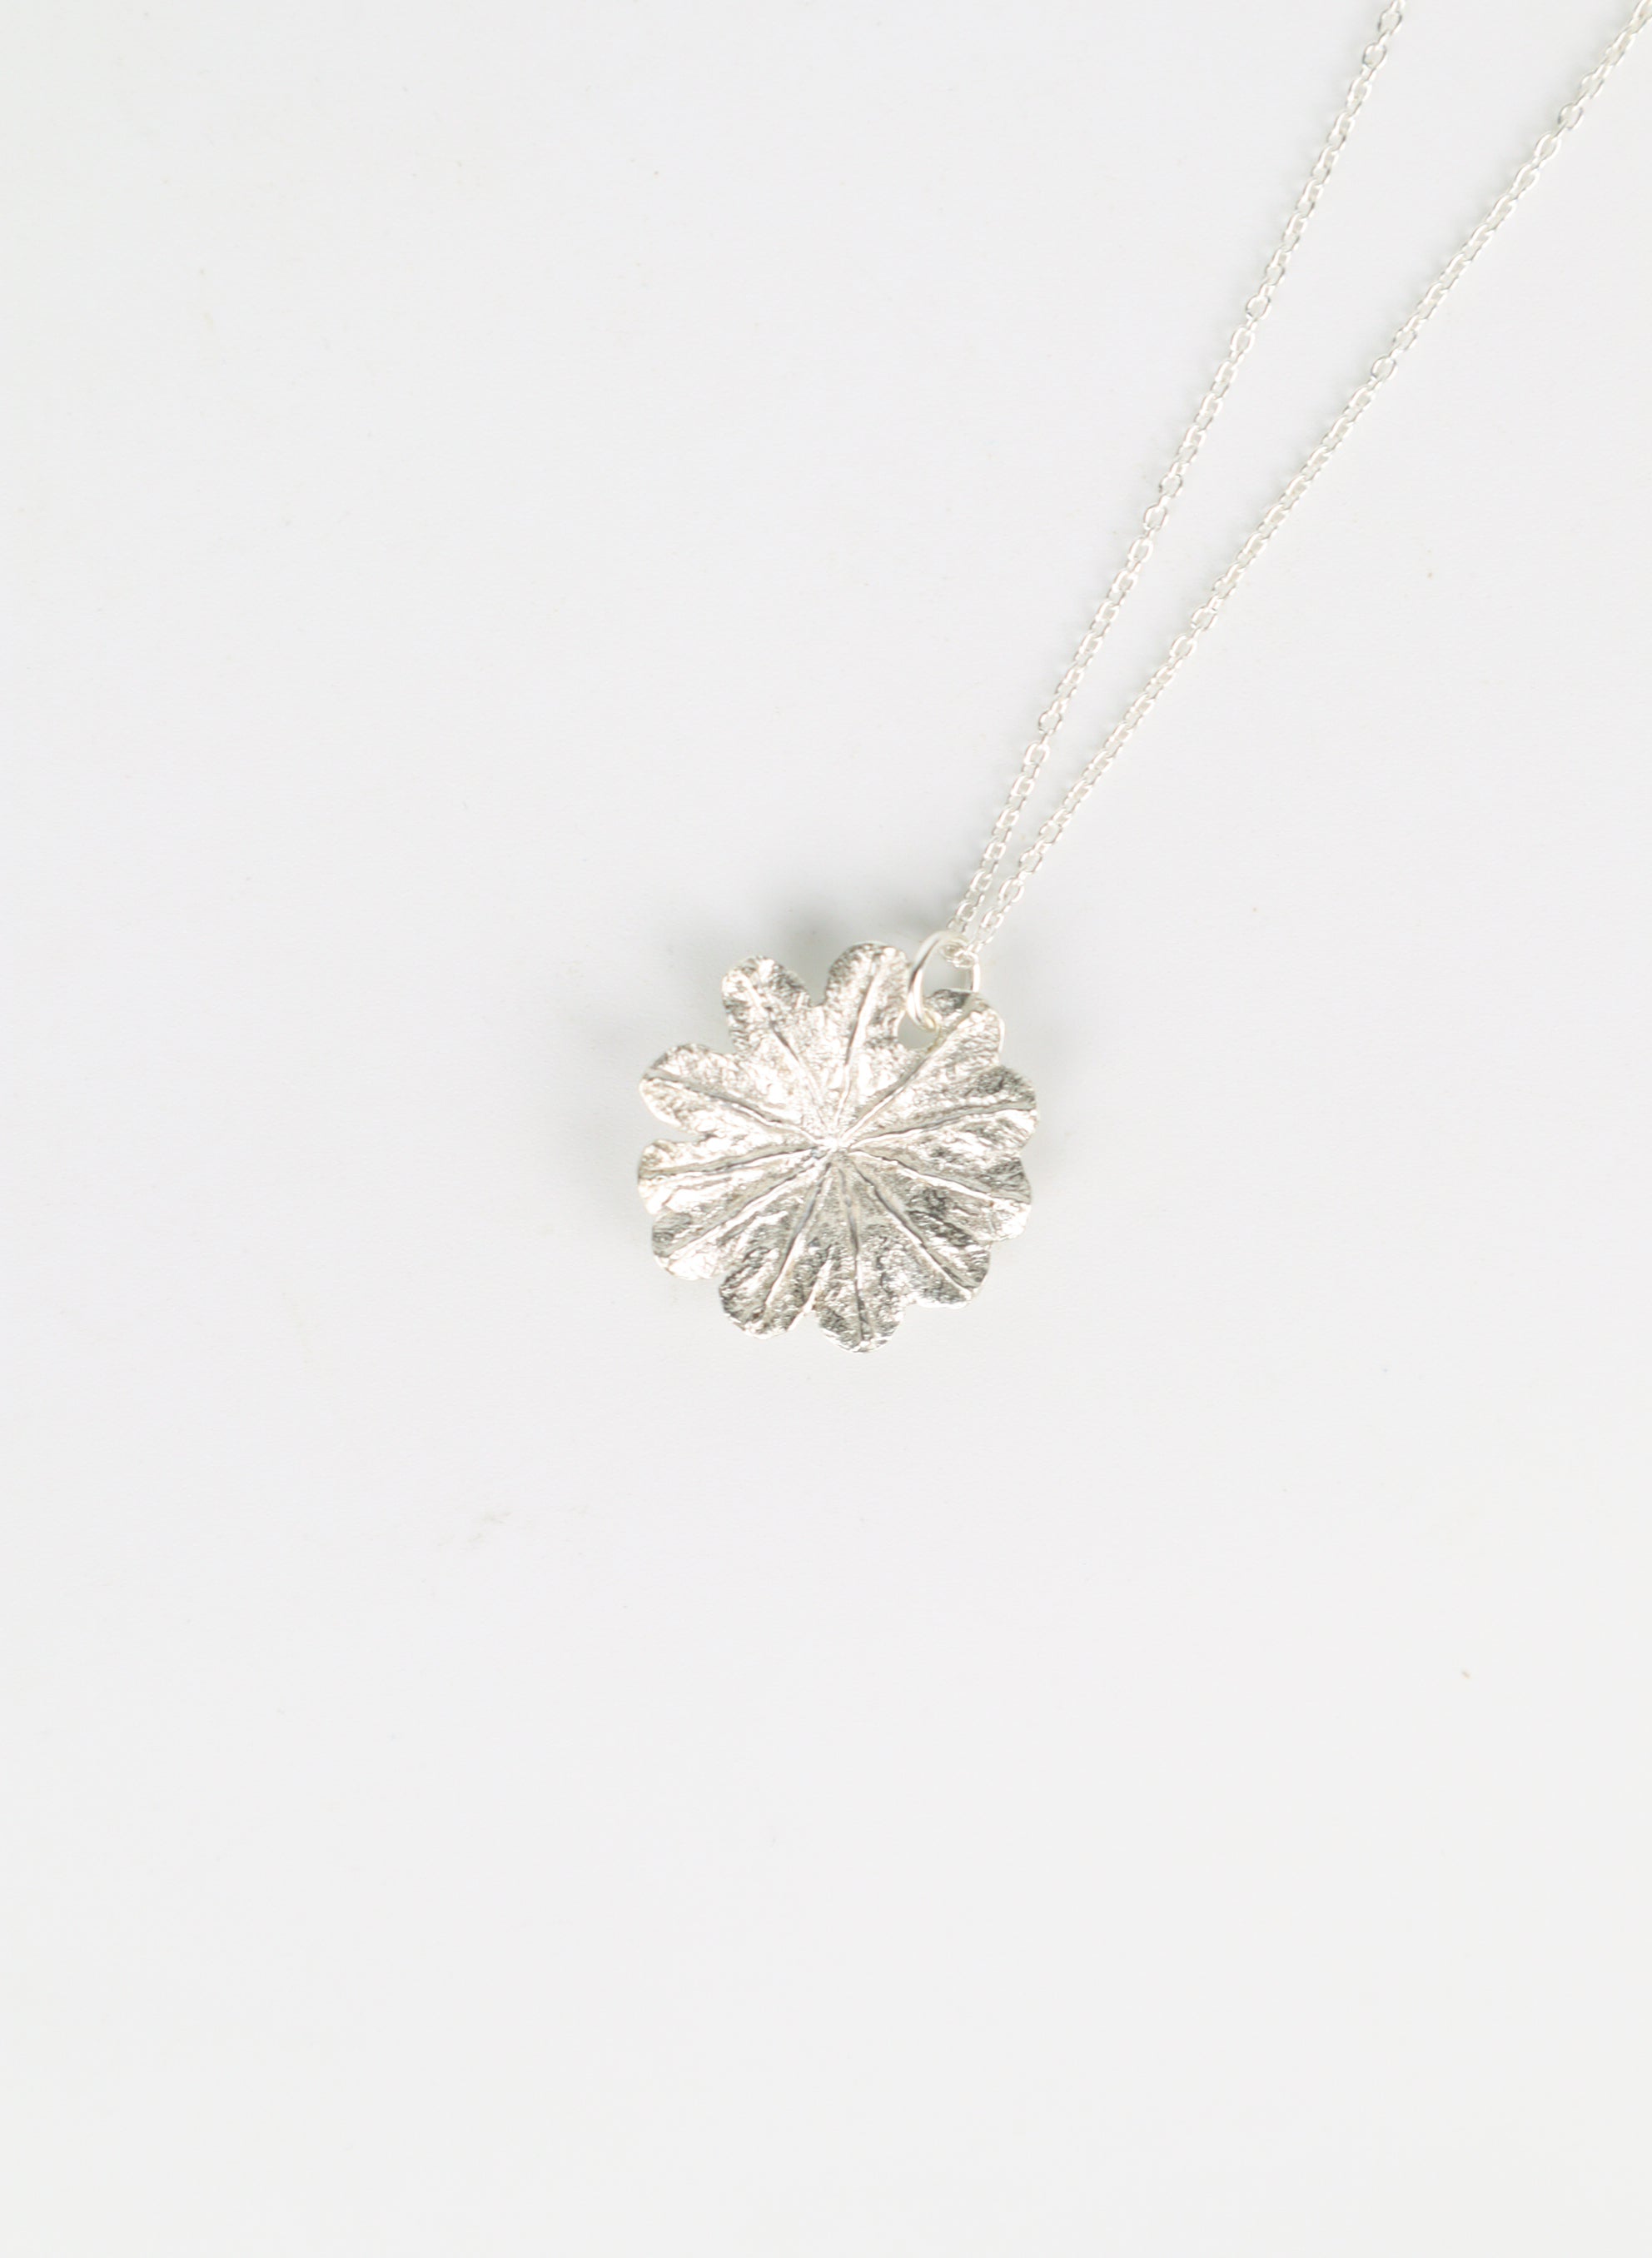 Poppy Top Necklace - Stirling Silver